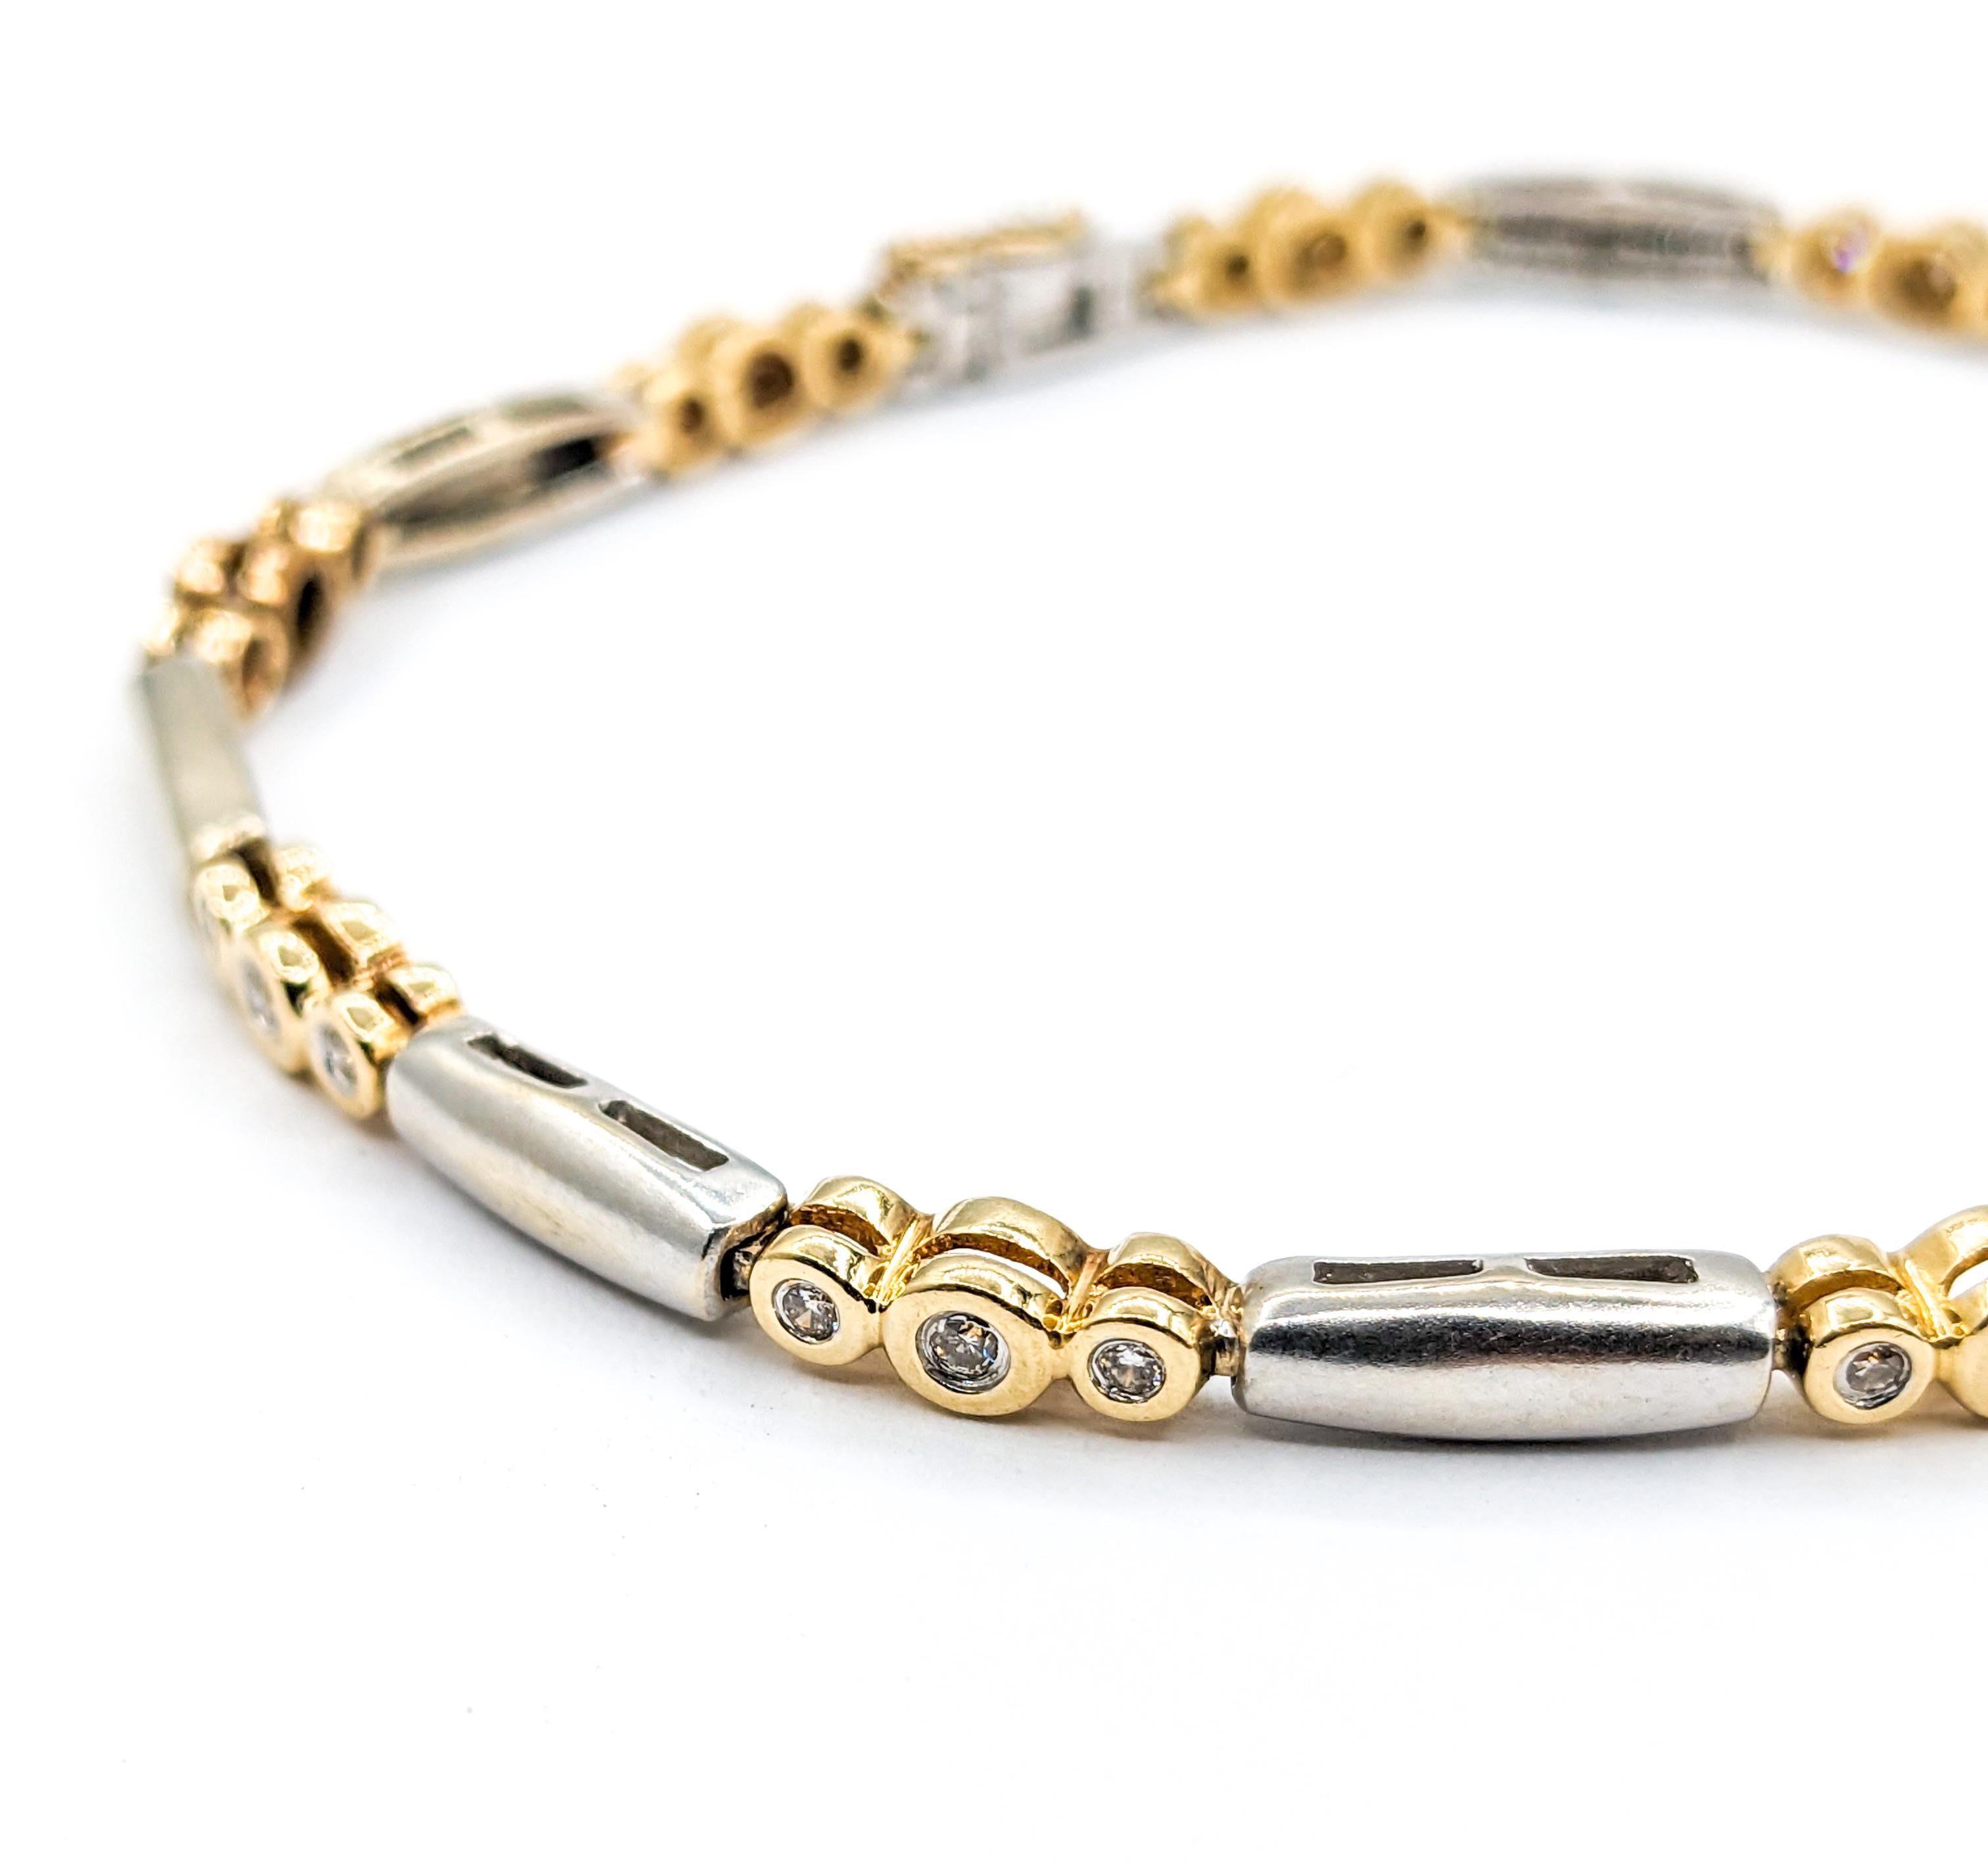 Diamond Bezel Set Bracelet Two Tone Gold

Introducing an exquisite bracelet, masterfully crafted in 14kt two tone gold, adorned with .50 carat total weight of round diamonds. These glittering diamonds boast I clarity and a near colorless white hue,